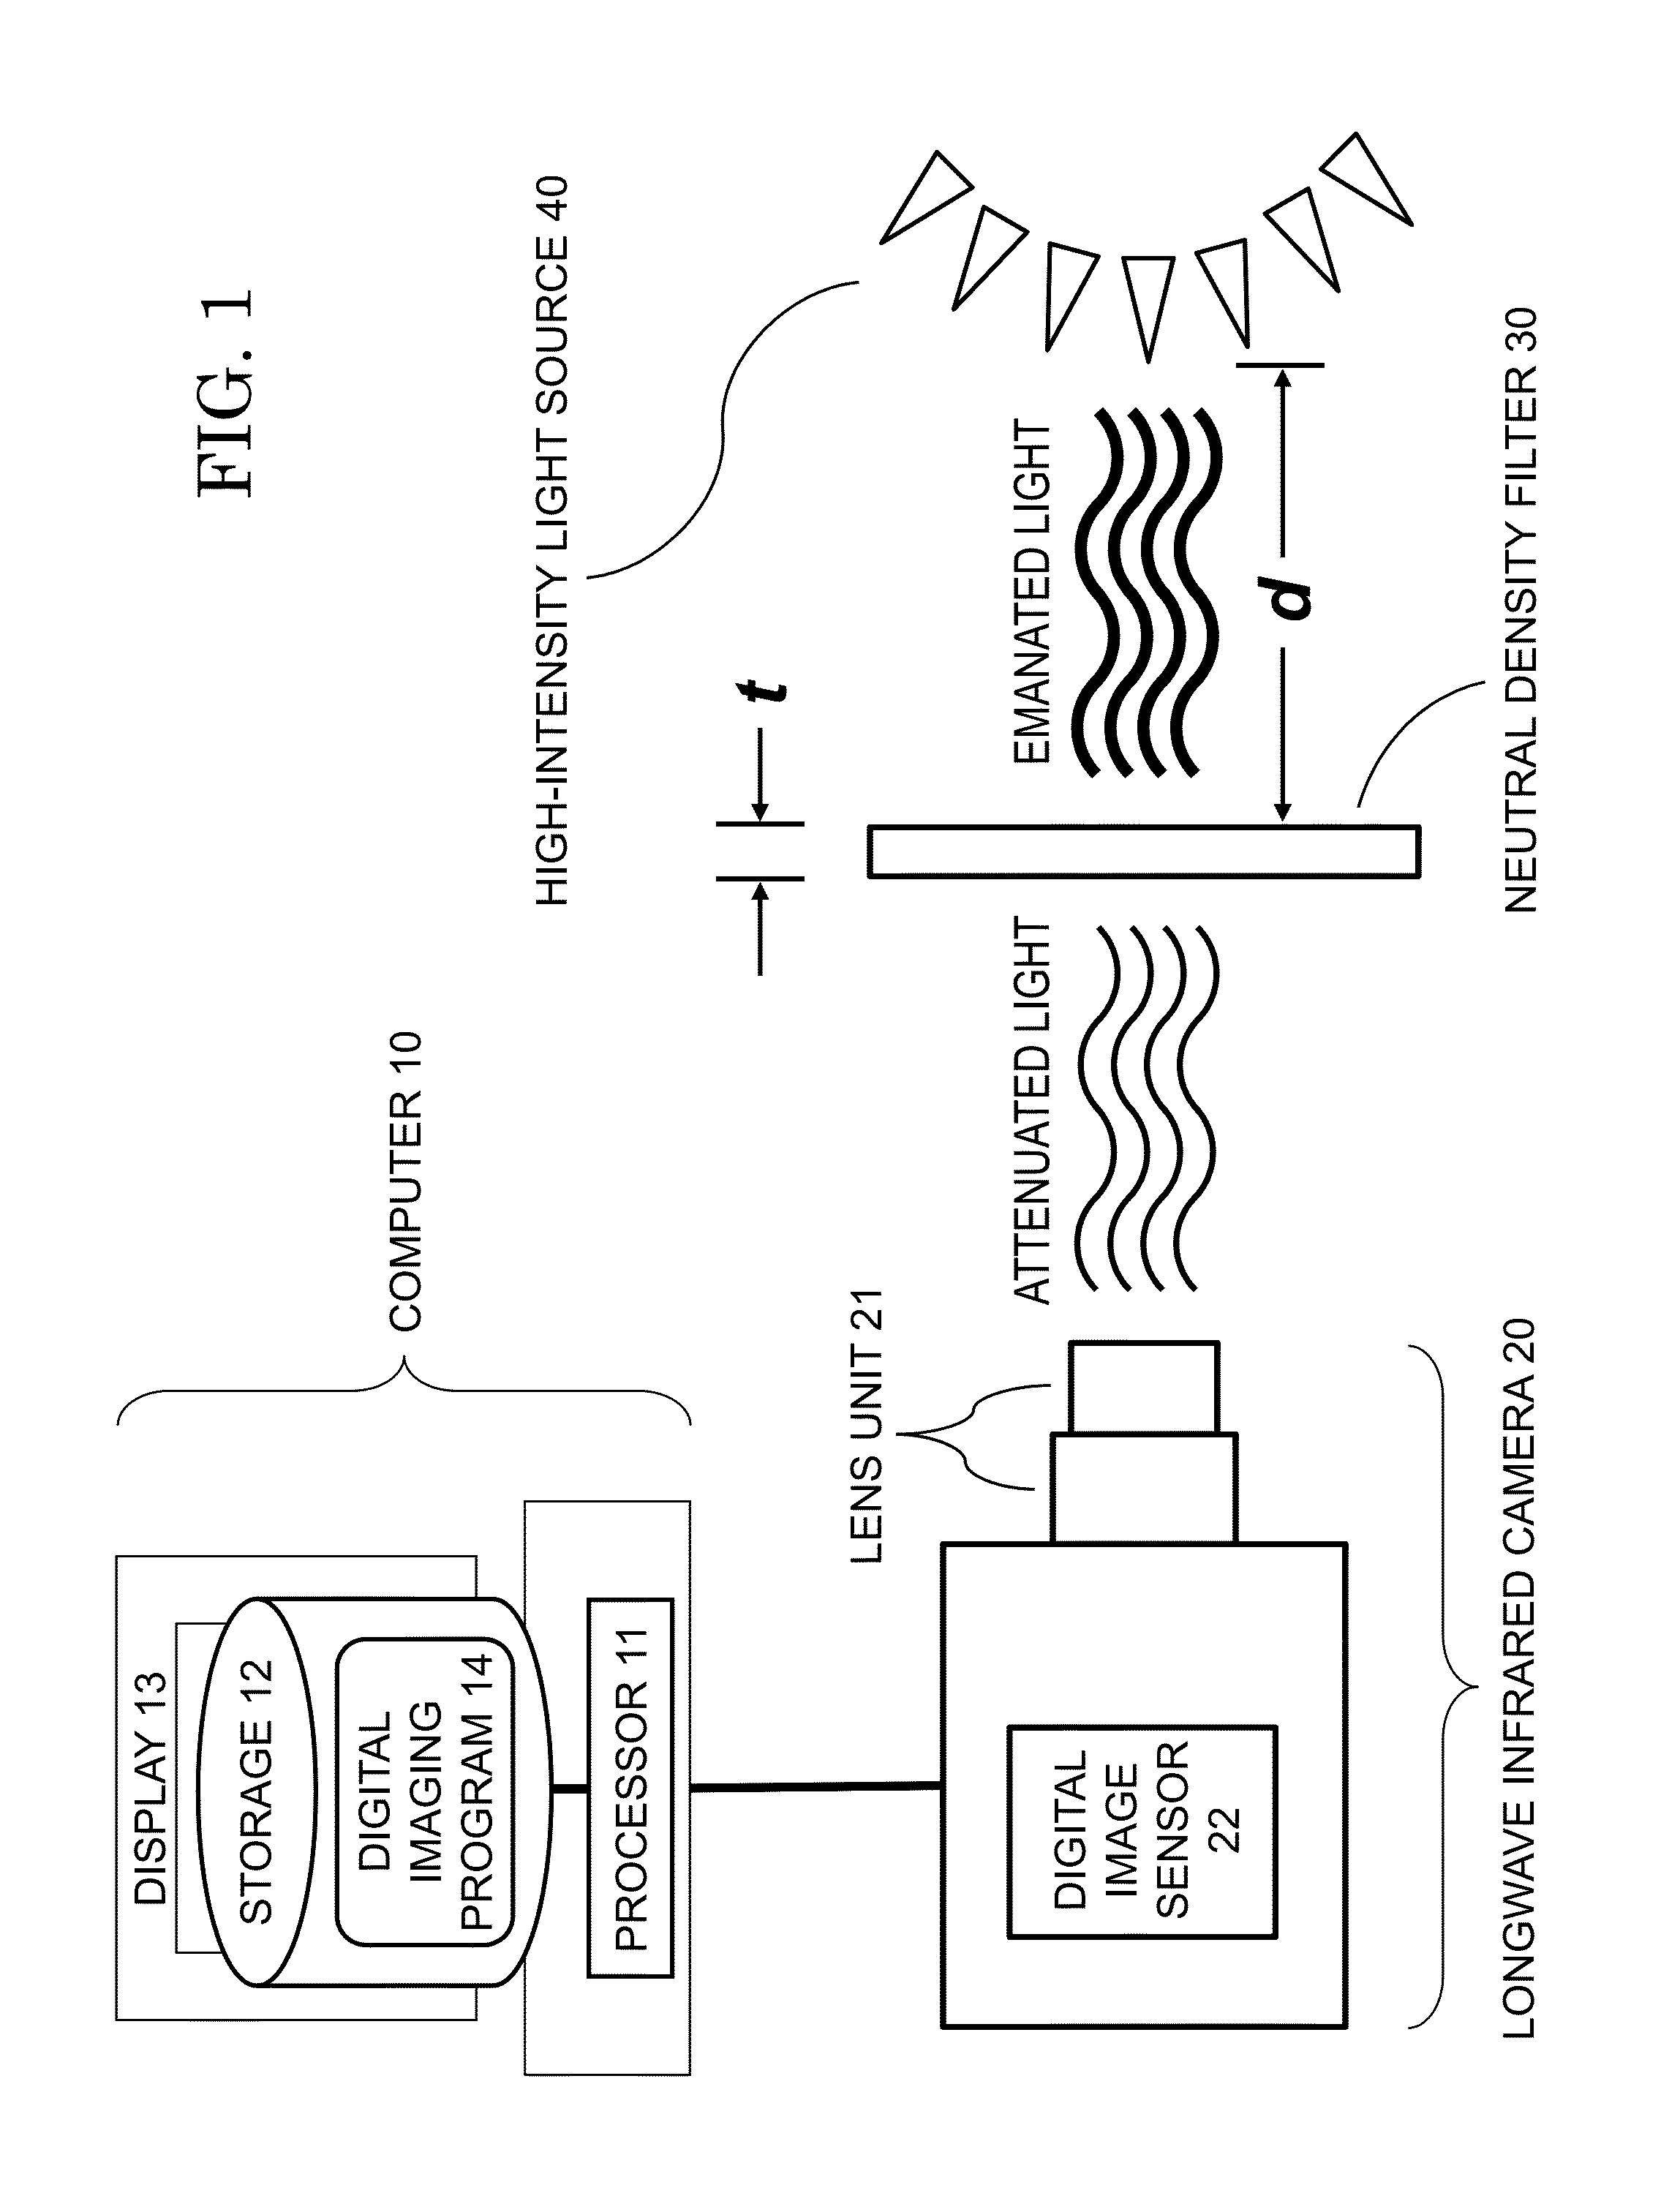 Longwave infrared imaging of a high-temperature, high-intensity light source